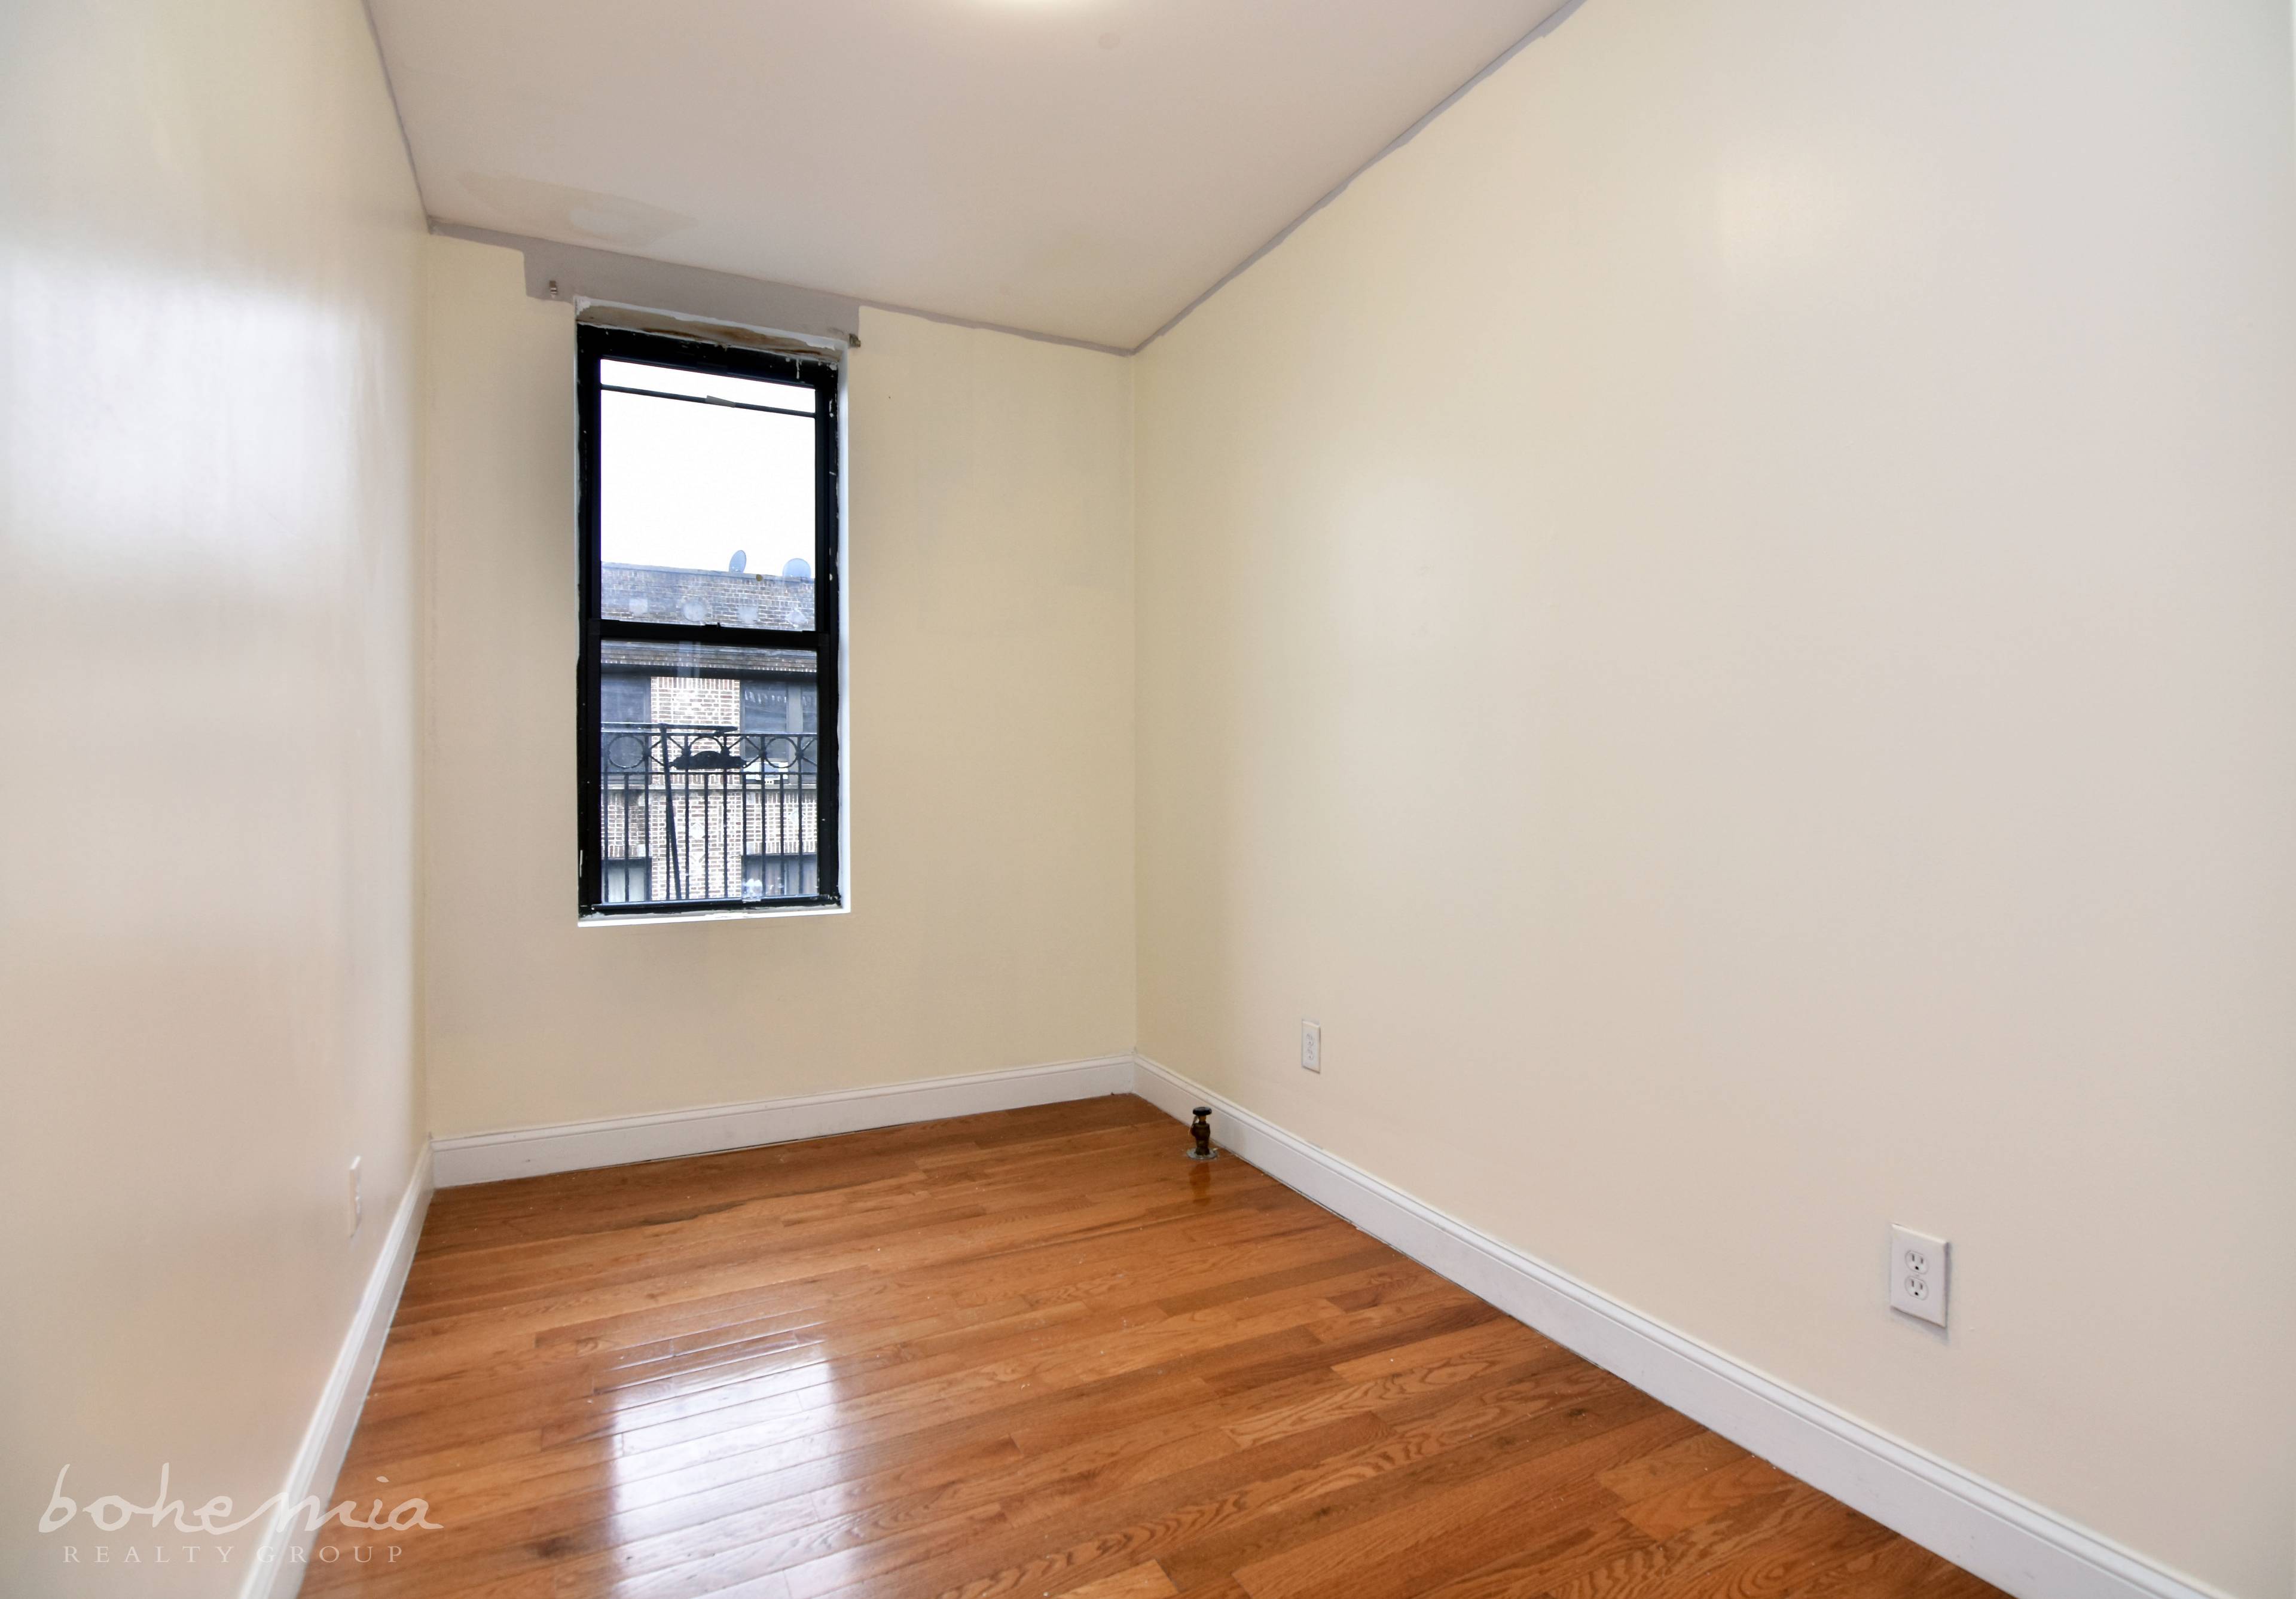 Snag this massive 3 bedroom unit with lots of lights, renovated kitchen, and plenty of closet space in a well maintained building with an elevator and laundry !